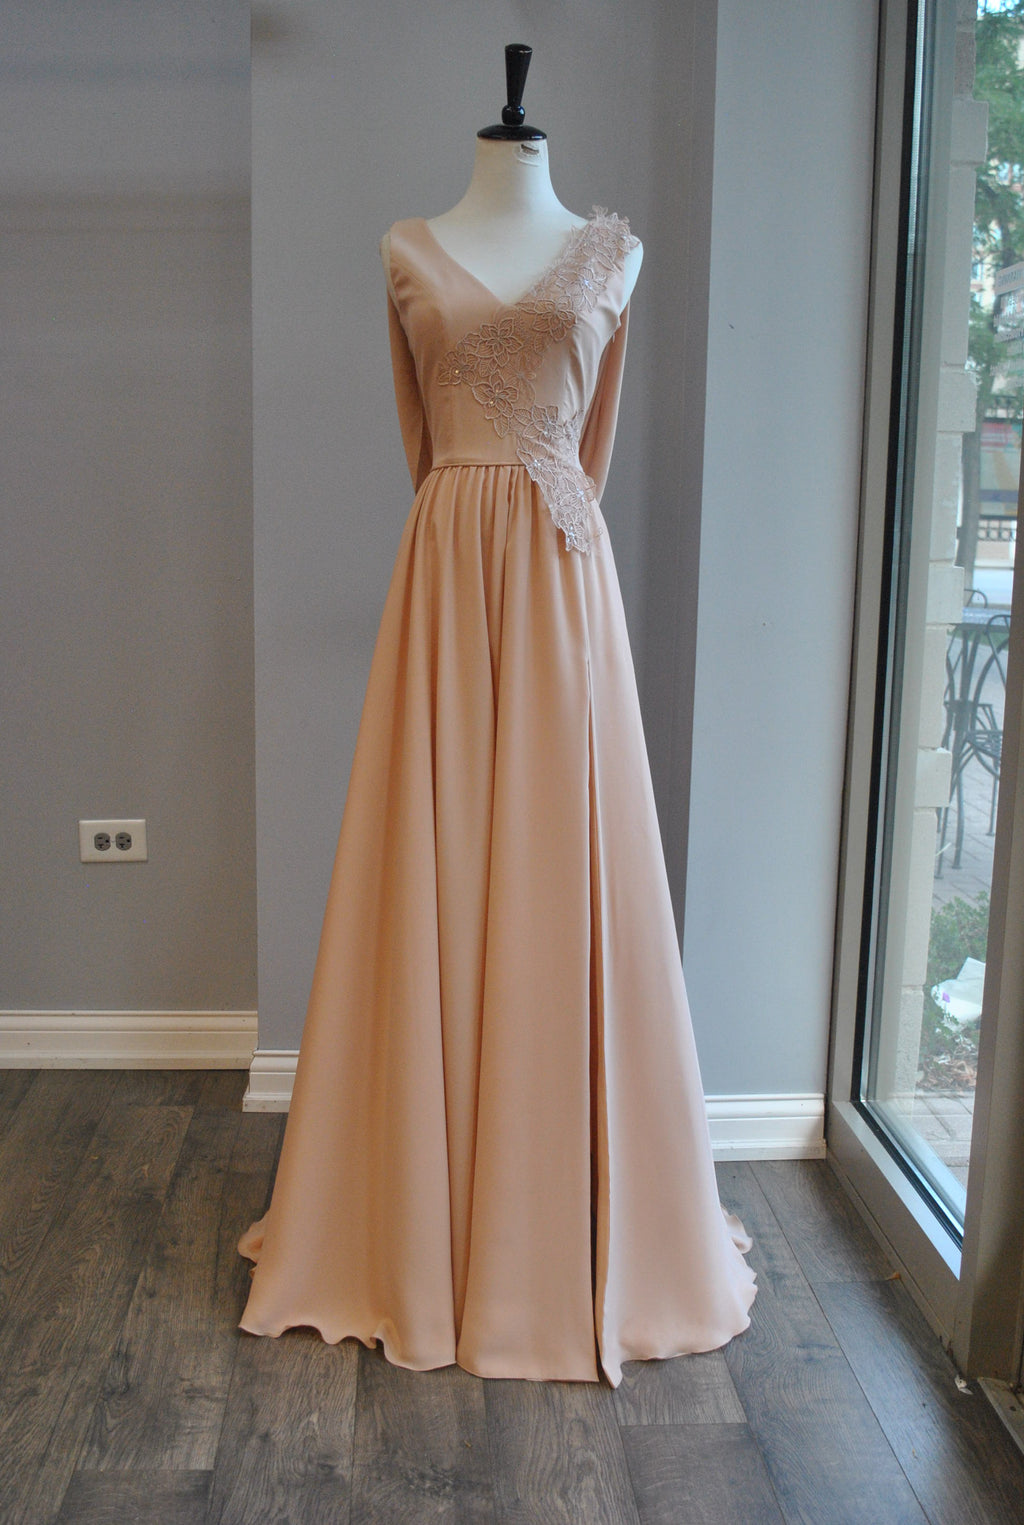 CLEARANCE - BLUSH PINK LONG EVENING GOWN WITH OPEN BACK